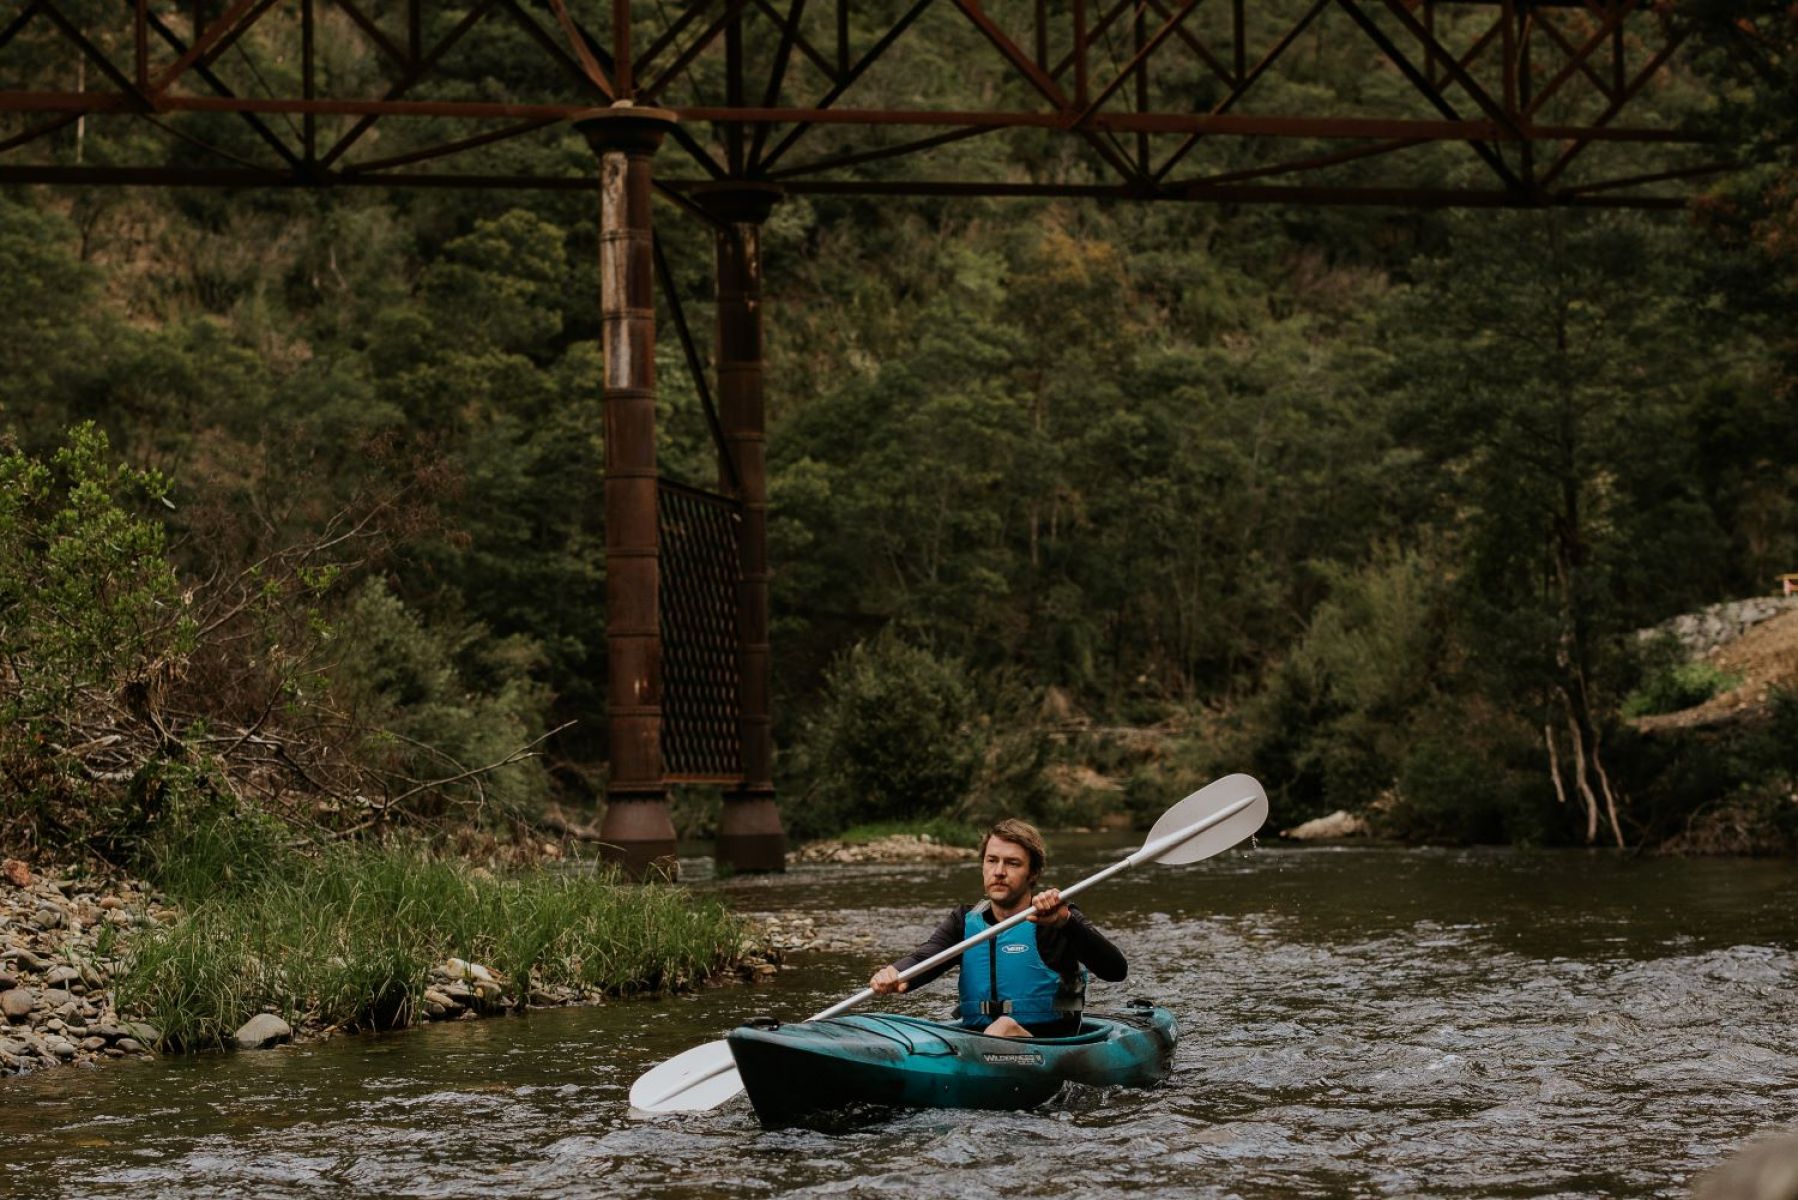 A person paddling on light rapids. A bridge is in the backrground and surrounded by trees.